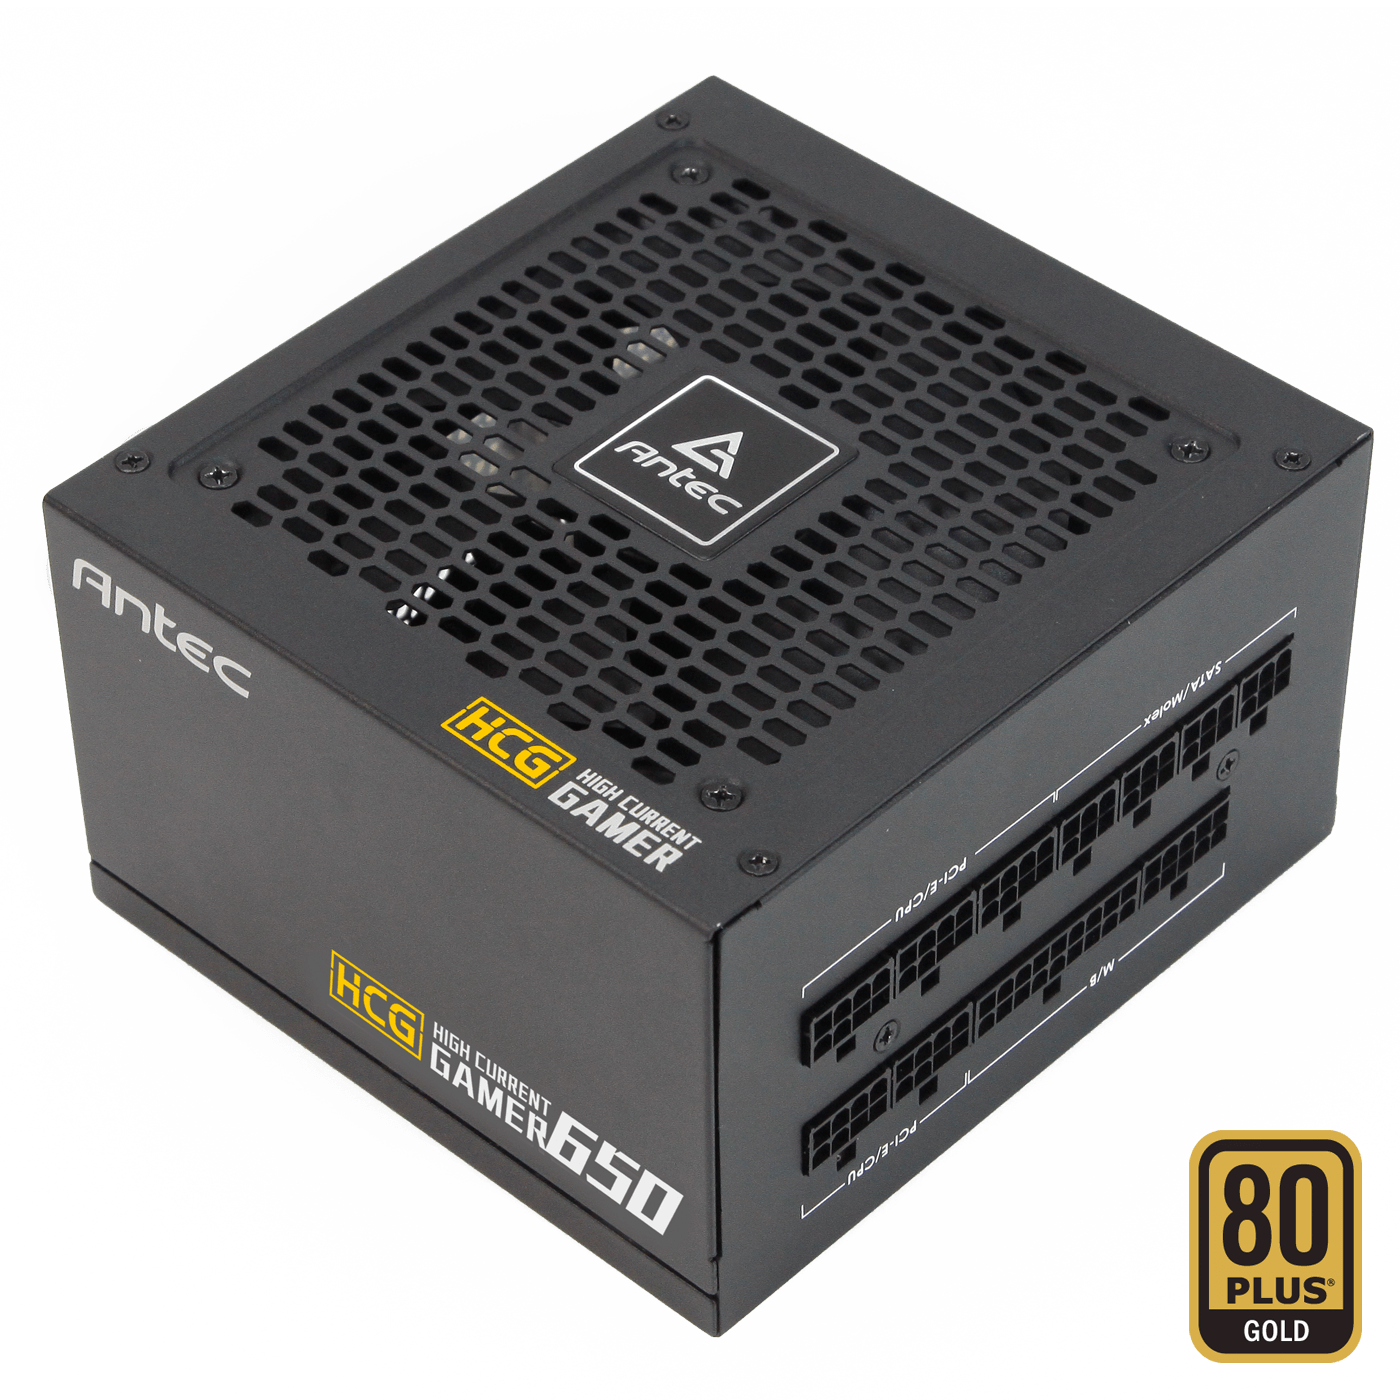 The HCG GOLD Best 650W psu is the 80 PLUS Gold Fully Modular PSU 